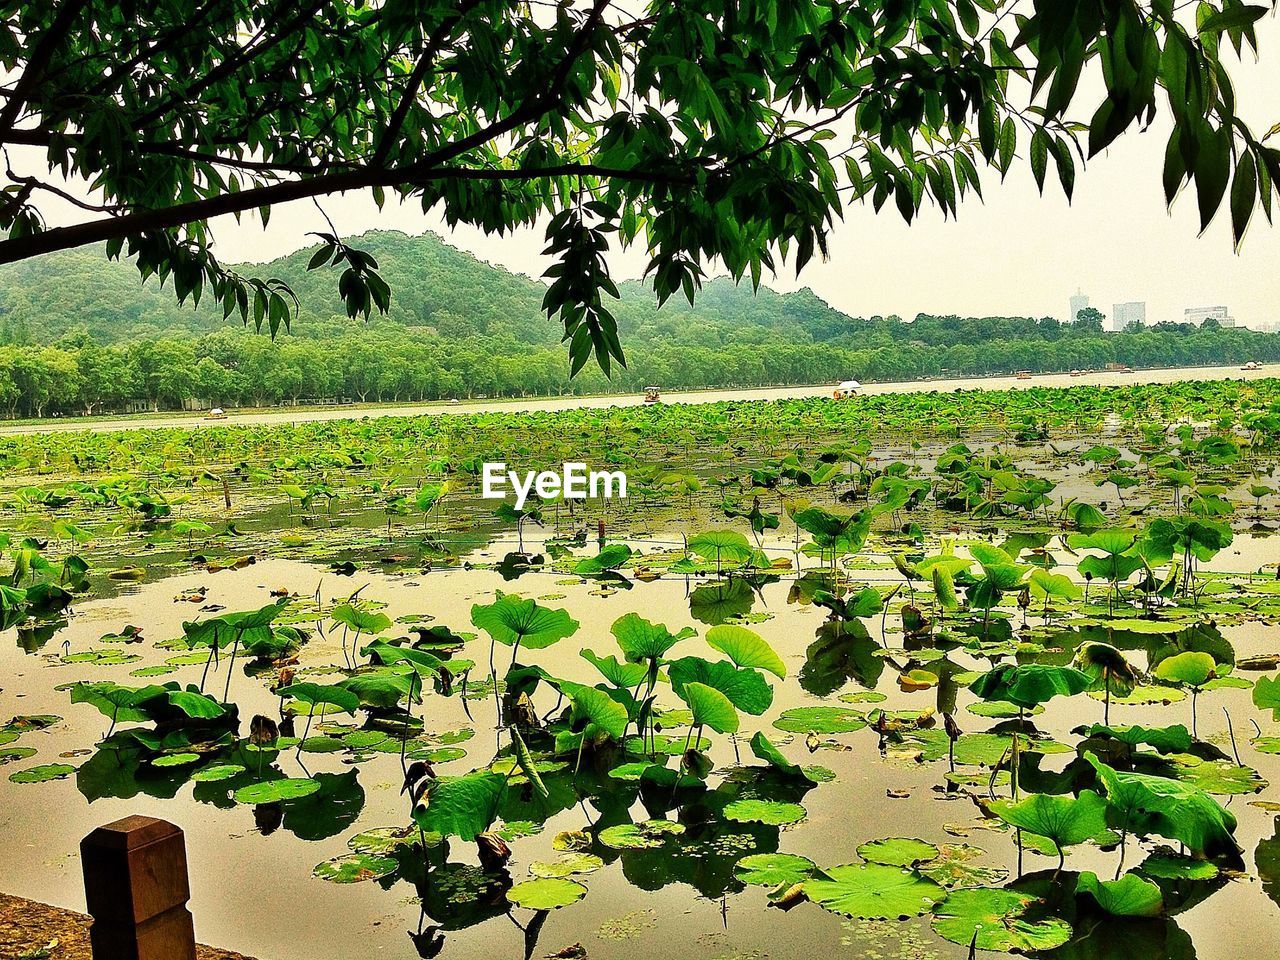 Lake with water lilies with trees in background